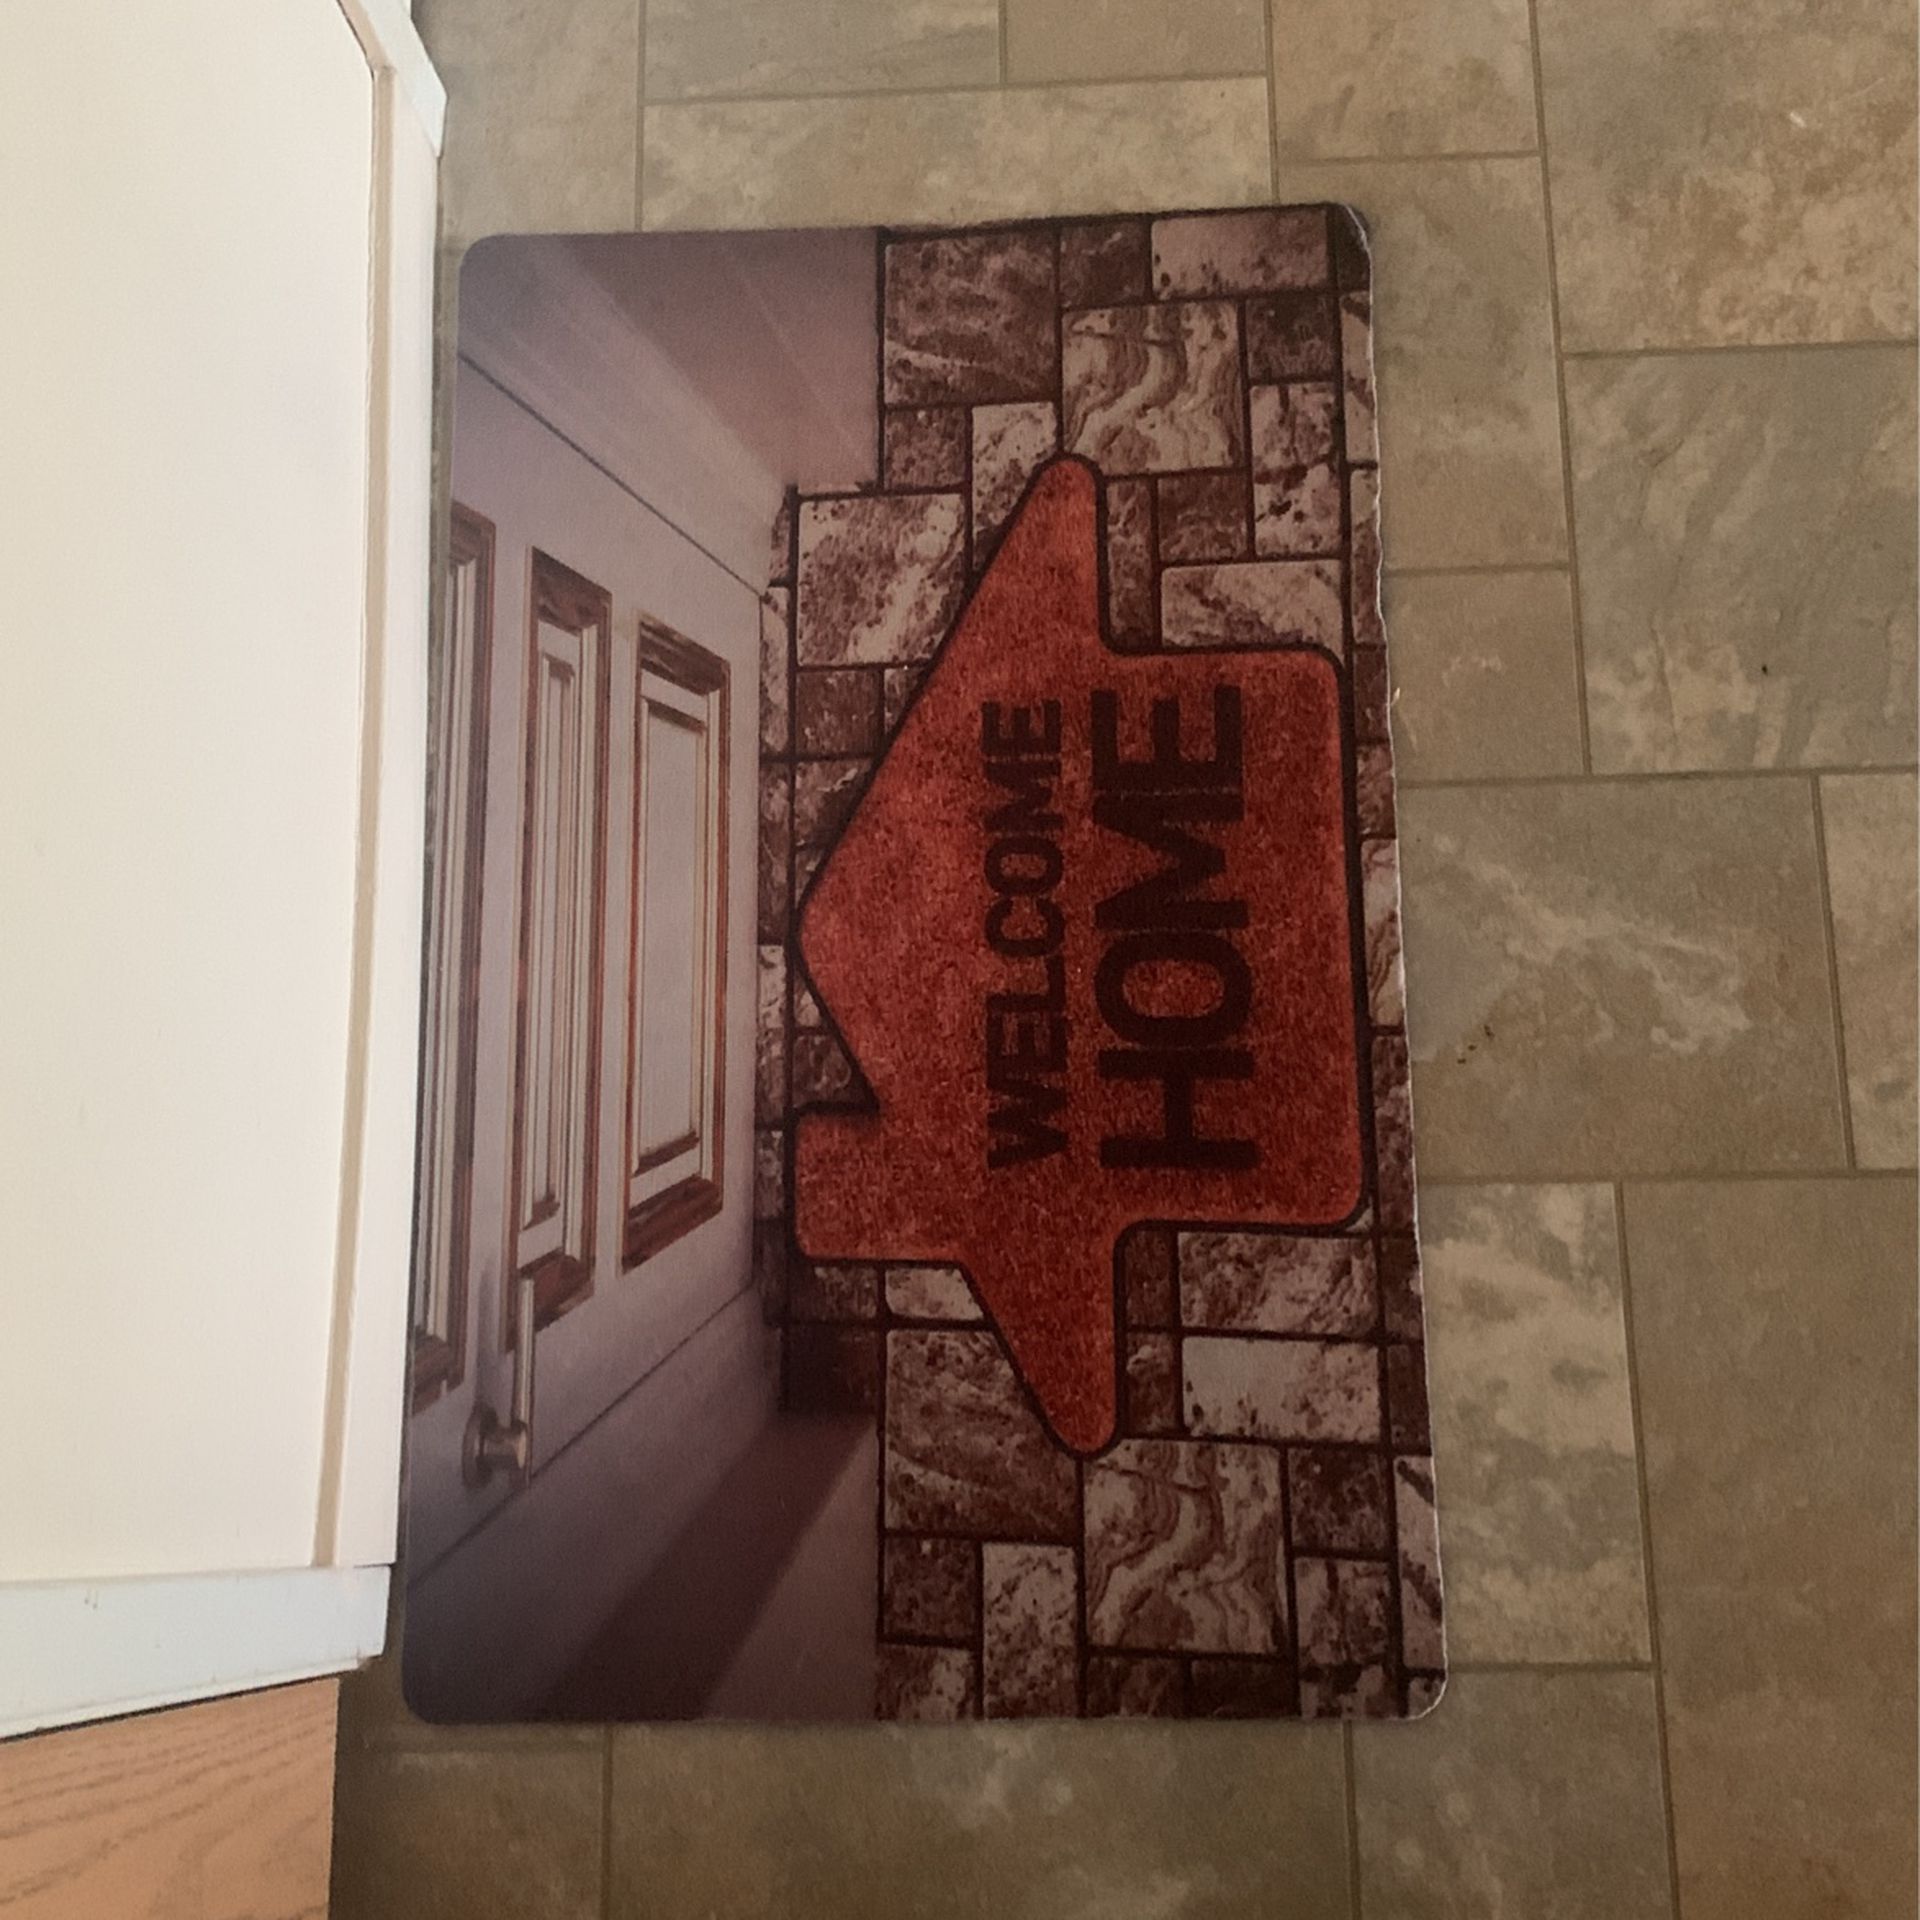 2 Welcome Home Mats $4